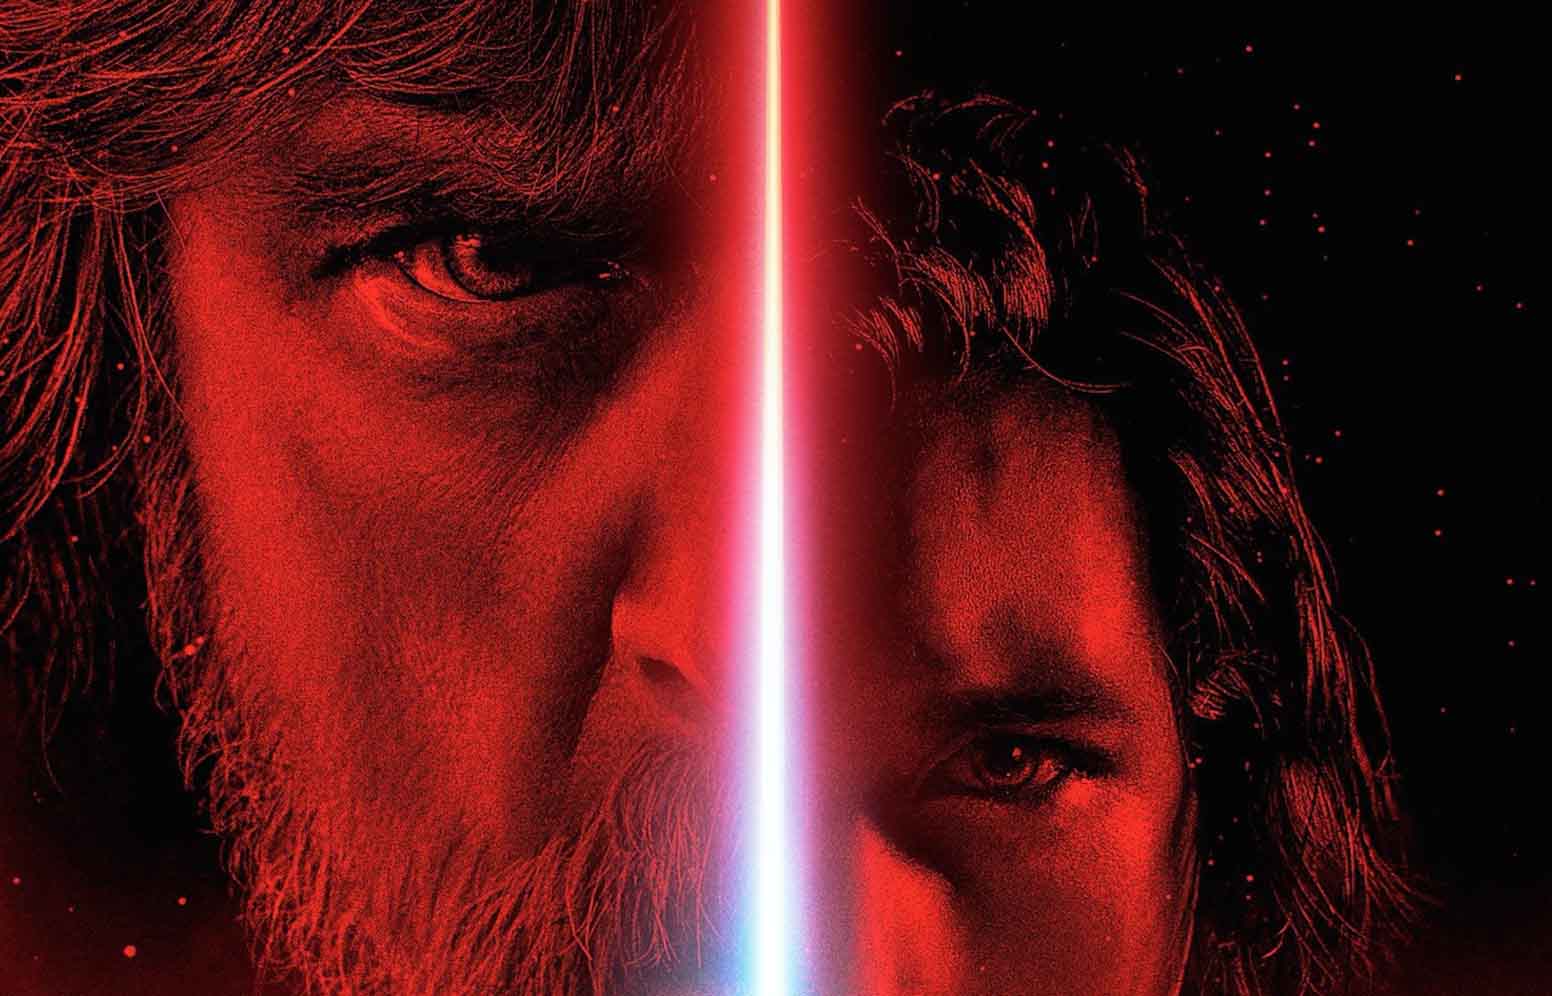 Star Wars: The Last Jedi: Why is Luke Skywalker ‘Significantly Important?’